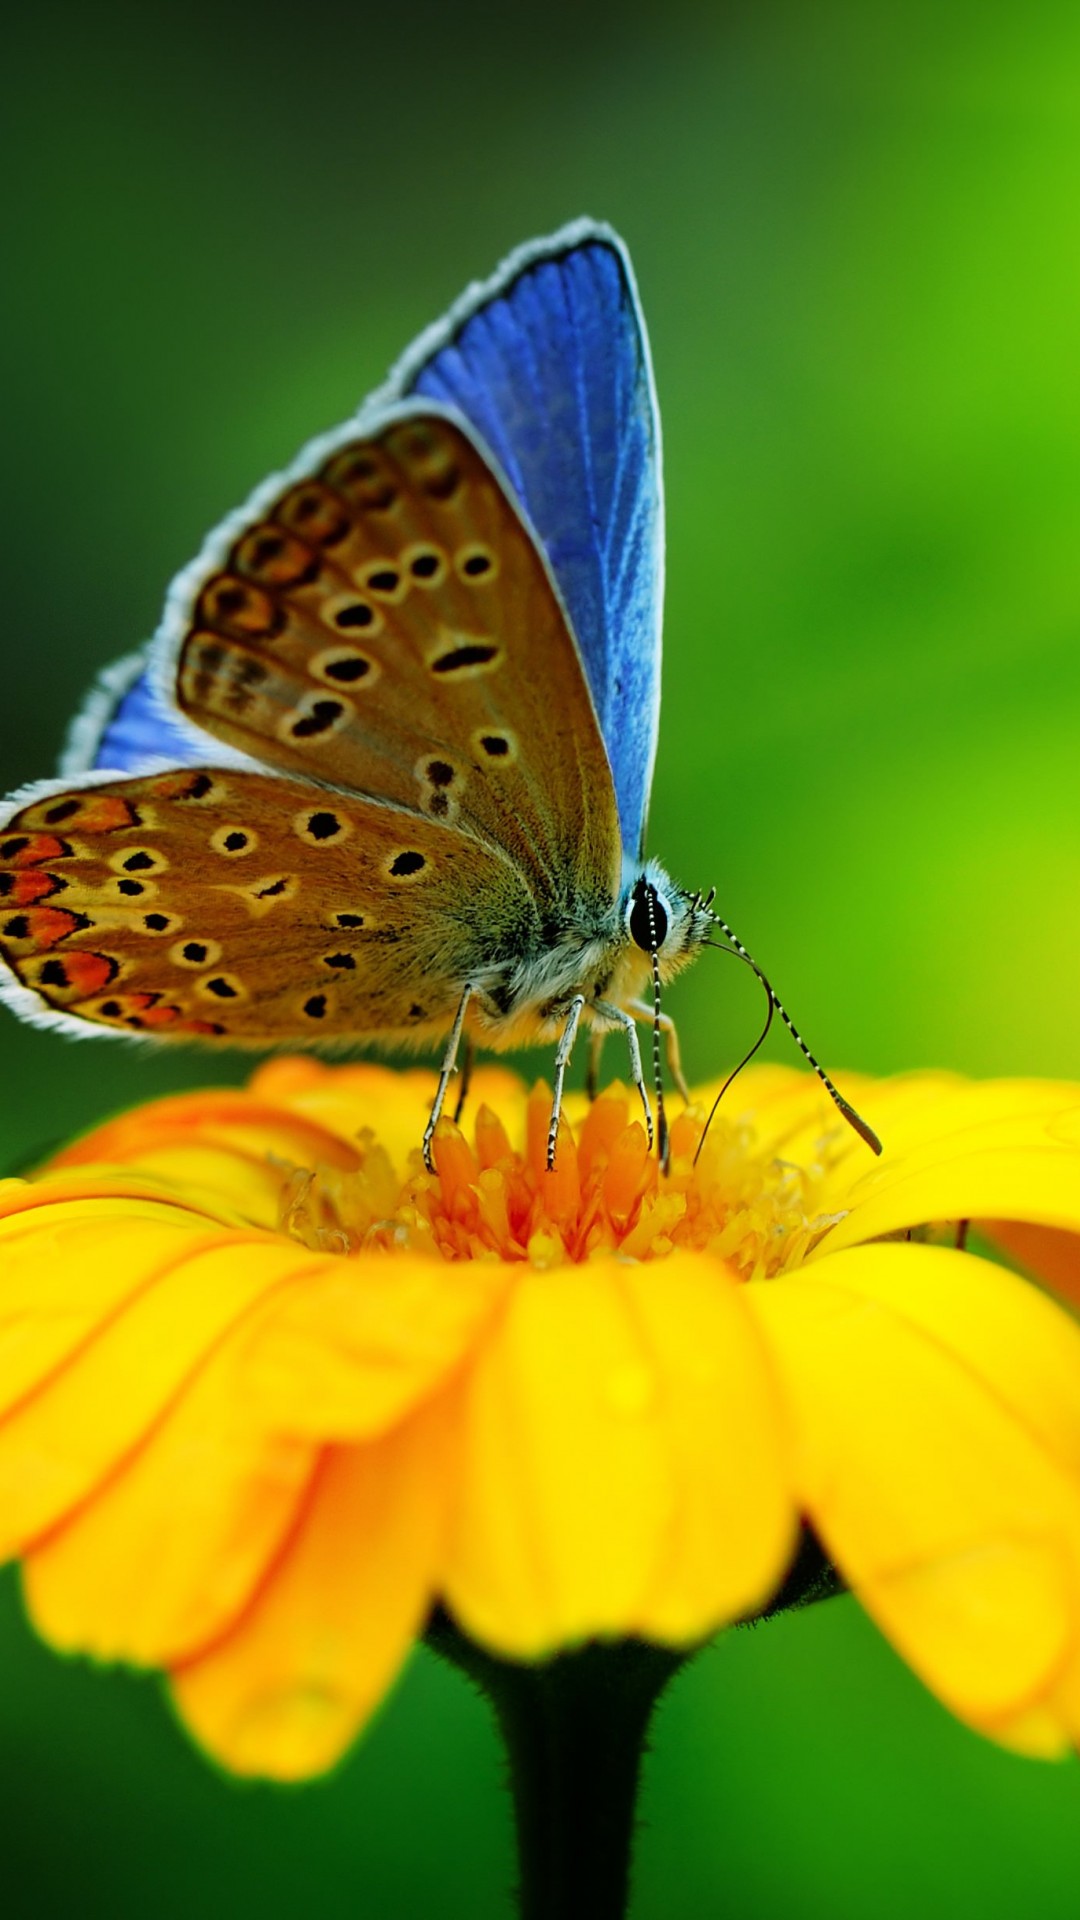 Butterfly Collecting Pollen Wallpaper for SONY Xperia Z3